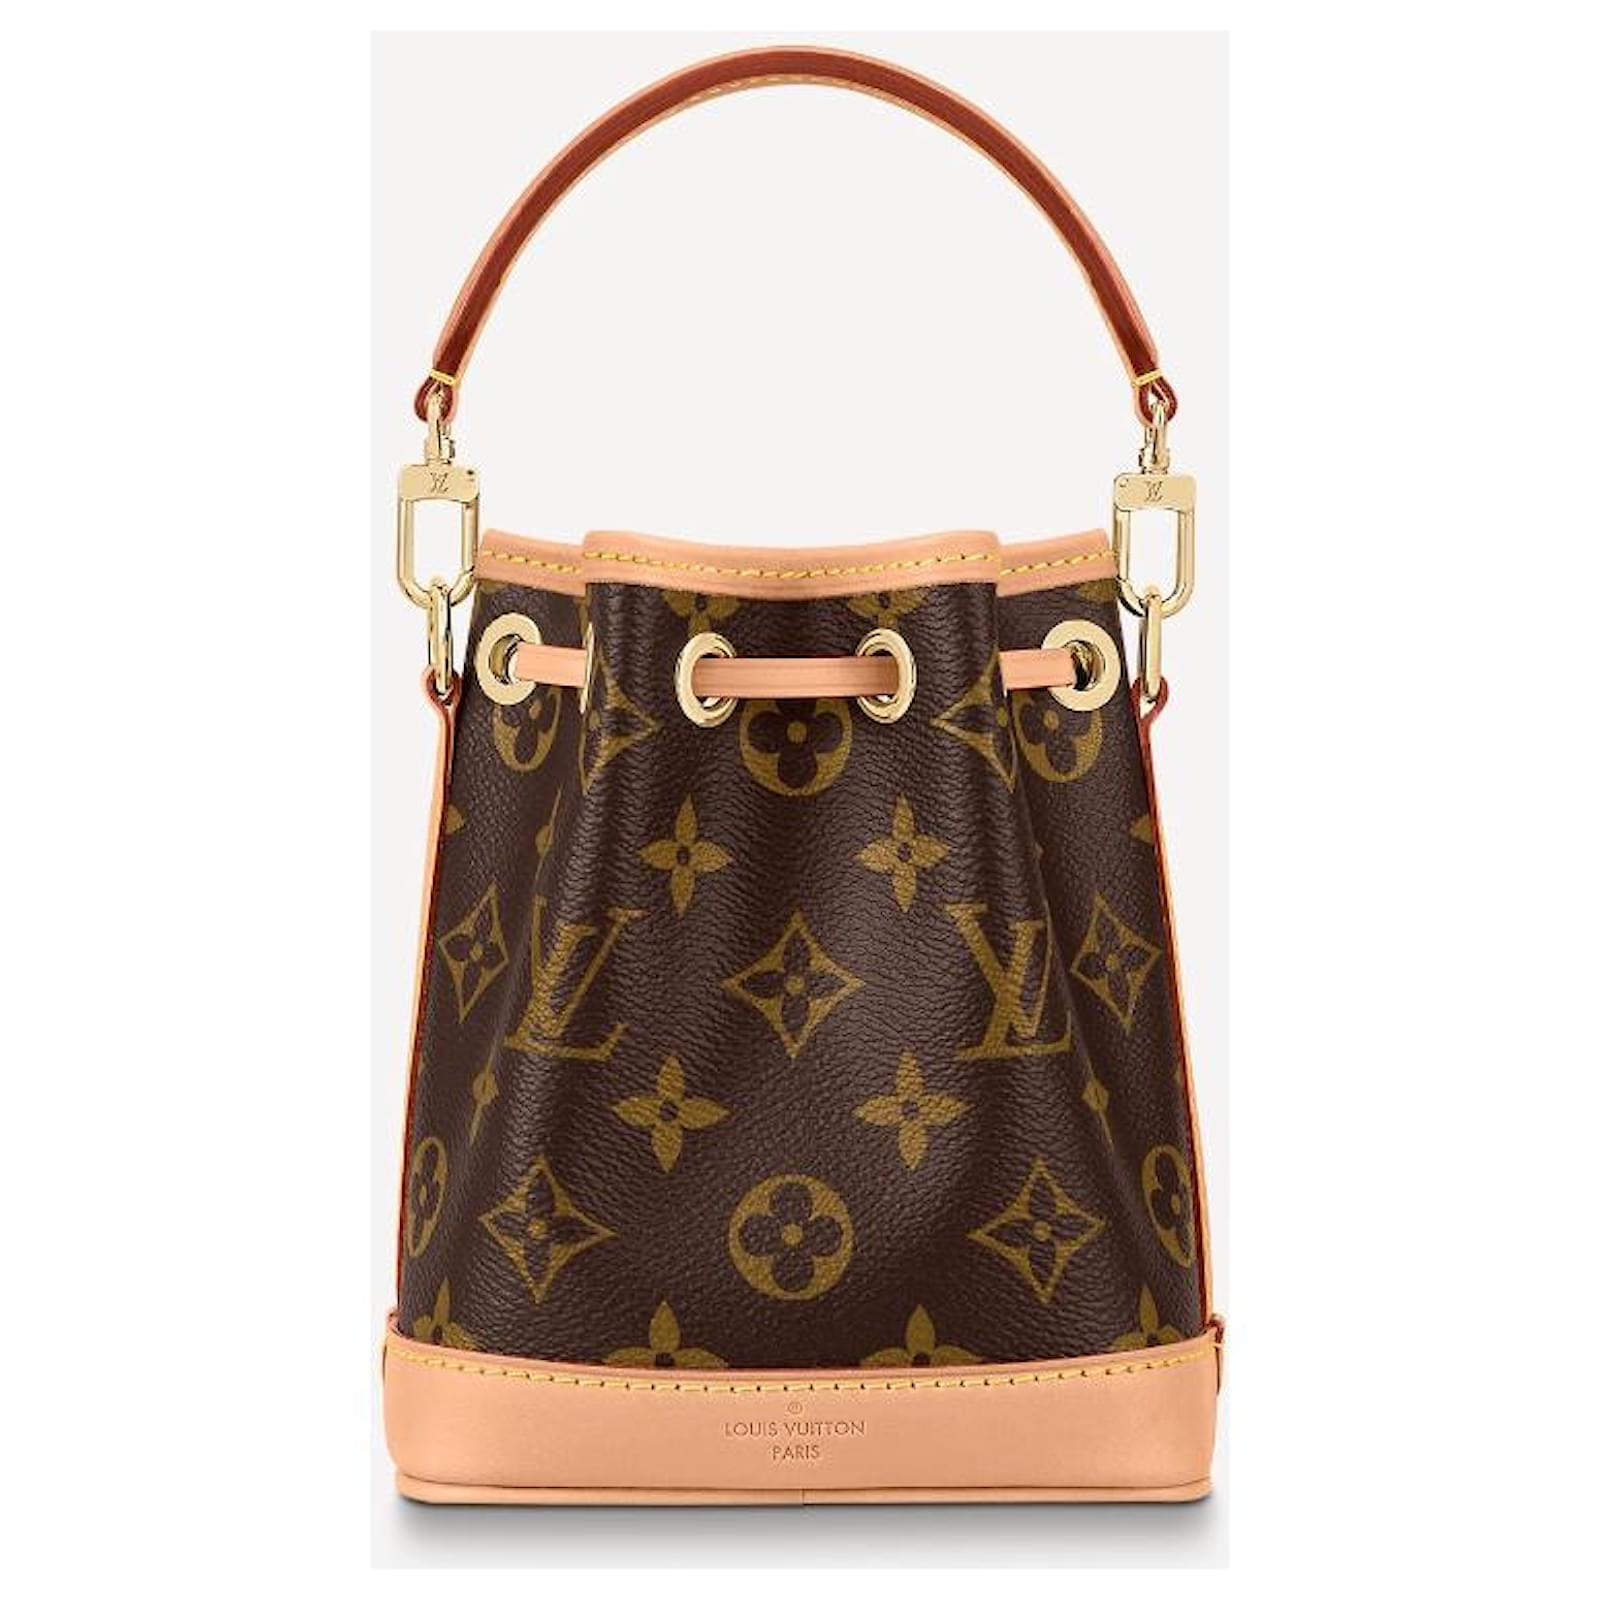 Louis Vuitton - Authenticated Nano Noé Handbag - Leather Brown Plain for Women, Never Worn, with Tag